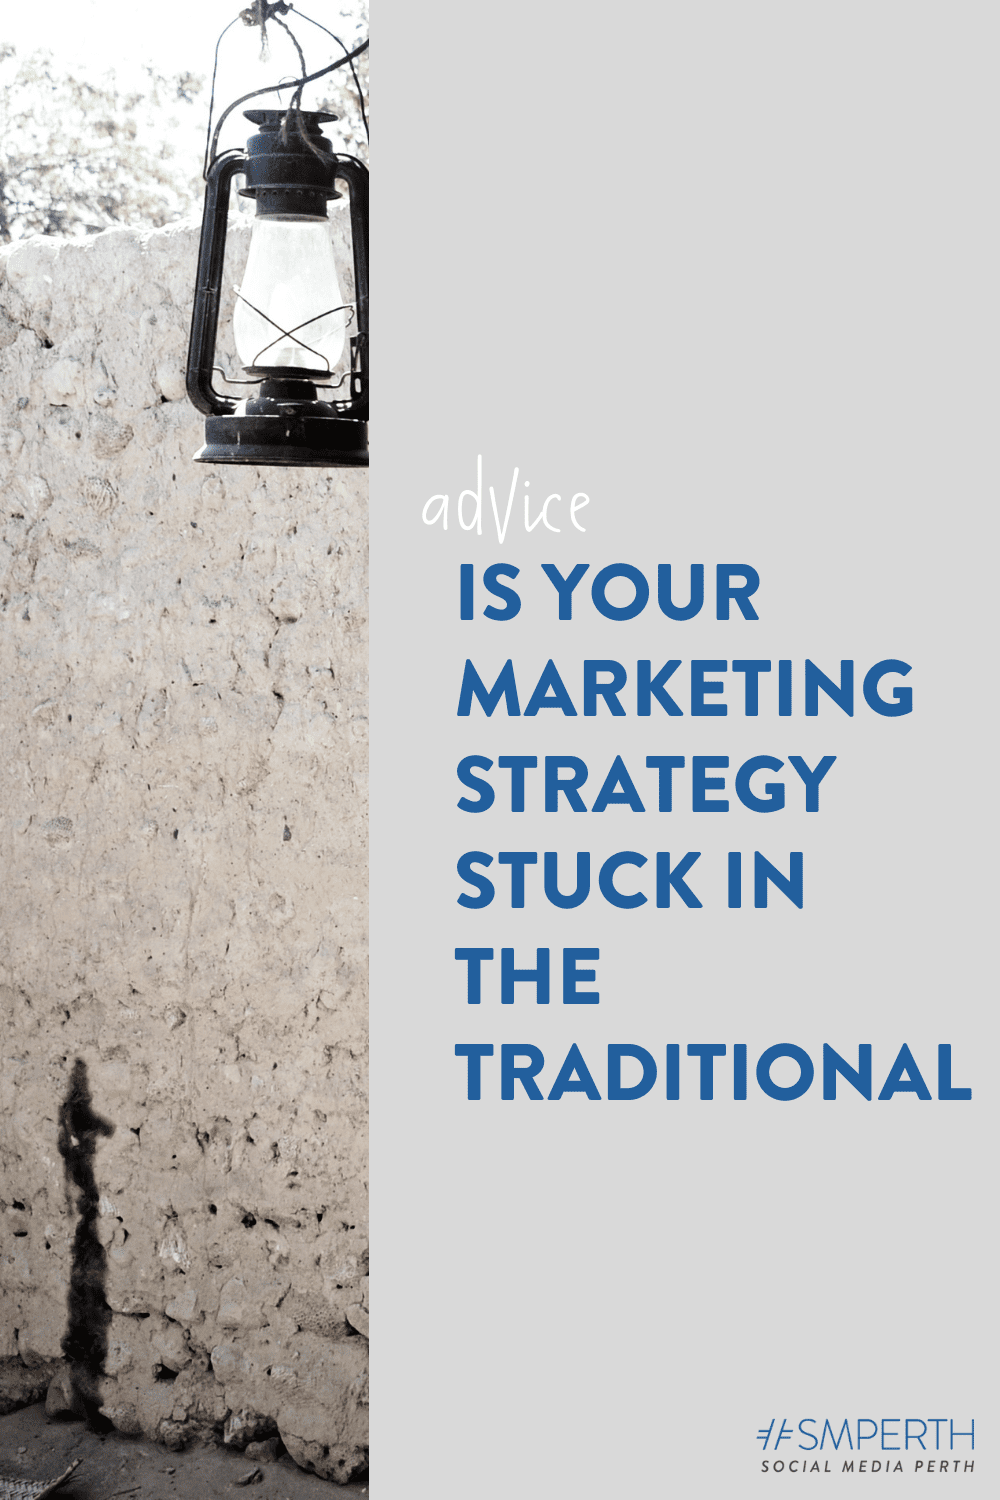 Is your marketing strategy stuck in the traditional?